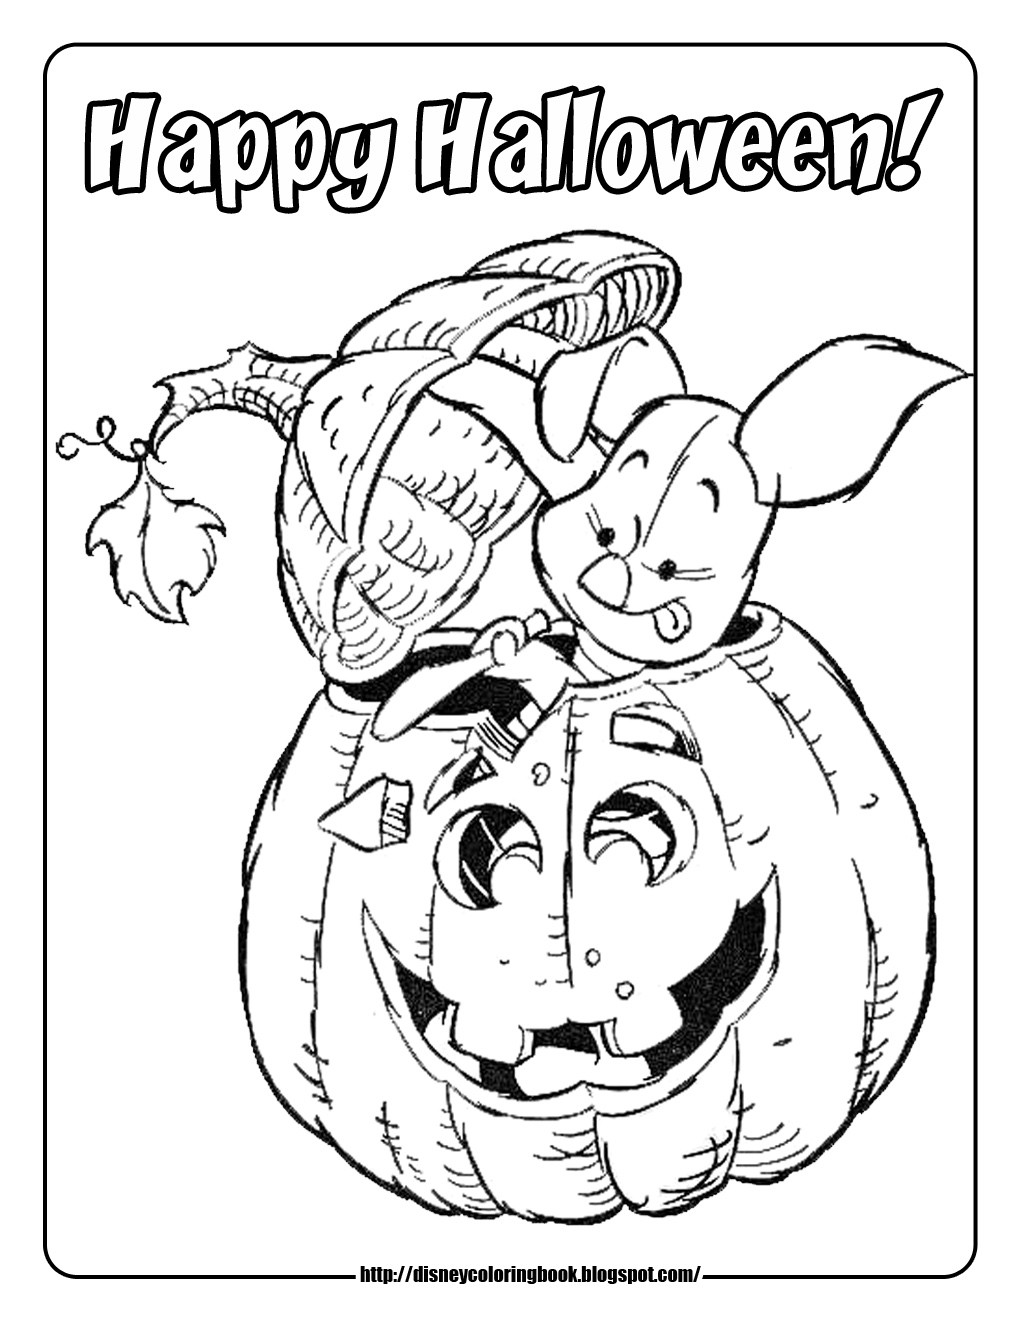 Free Printable Halloween Coloring Pages
 Disney Coloring Pages and Sheets for Kids